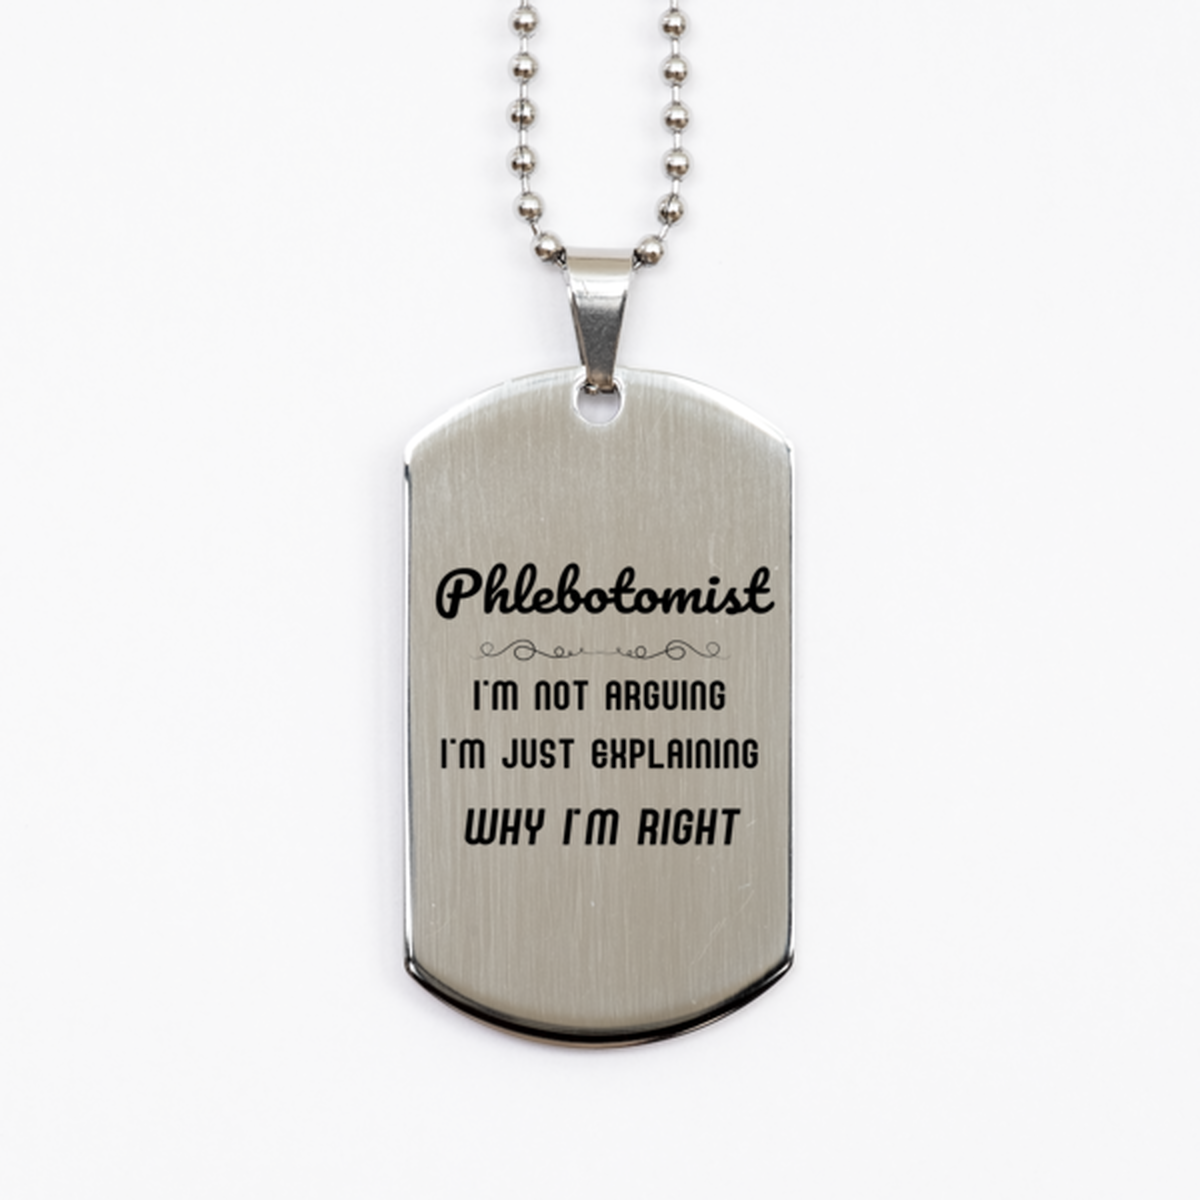 Phlebotomist I'm not Arguing. I'm Just Explaining Why I'm RIGHT Silver Dog Tag, Funny Saying Quote Phlebotomist Gifts For Phlebotomist Graduation Birthday Christmas Gifts for Men Women Coworker